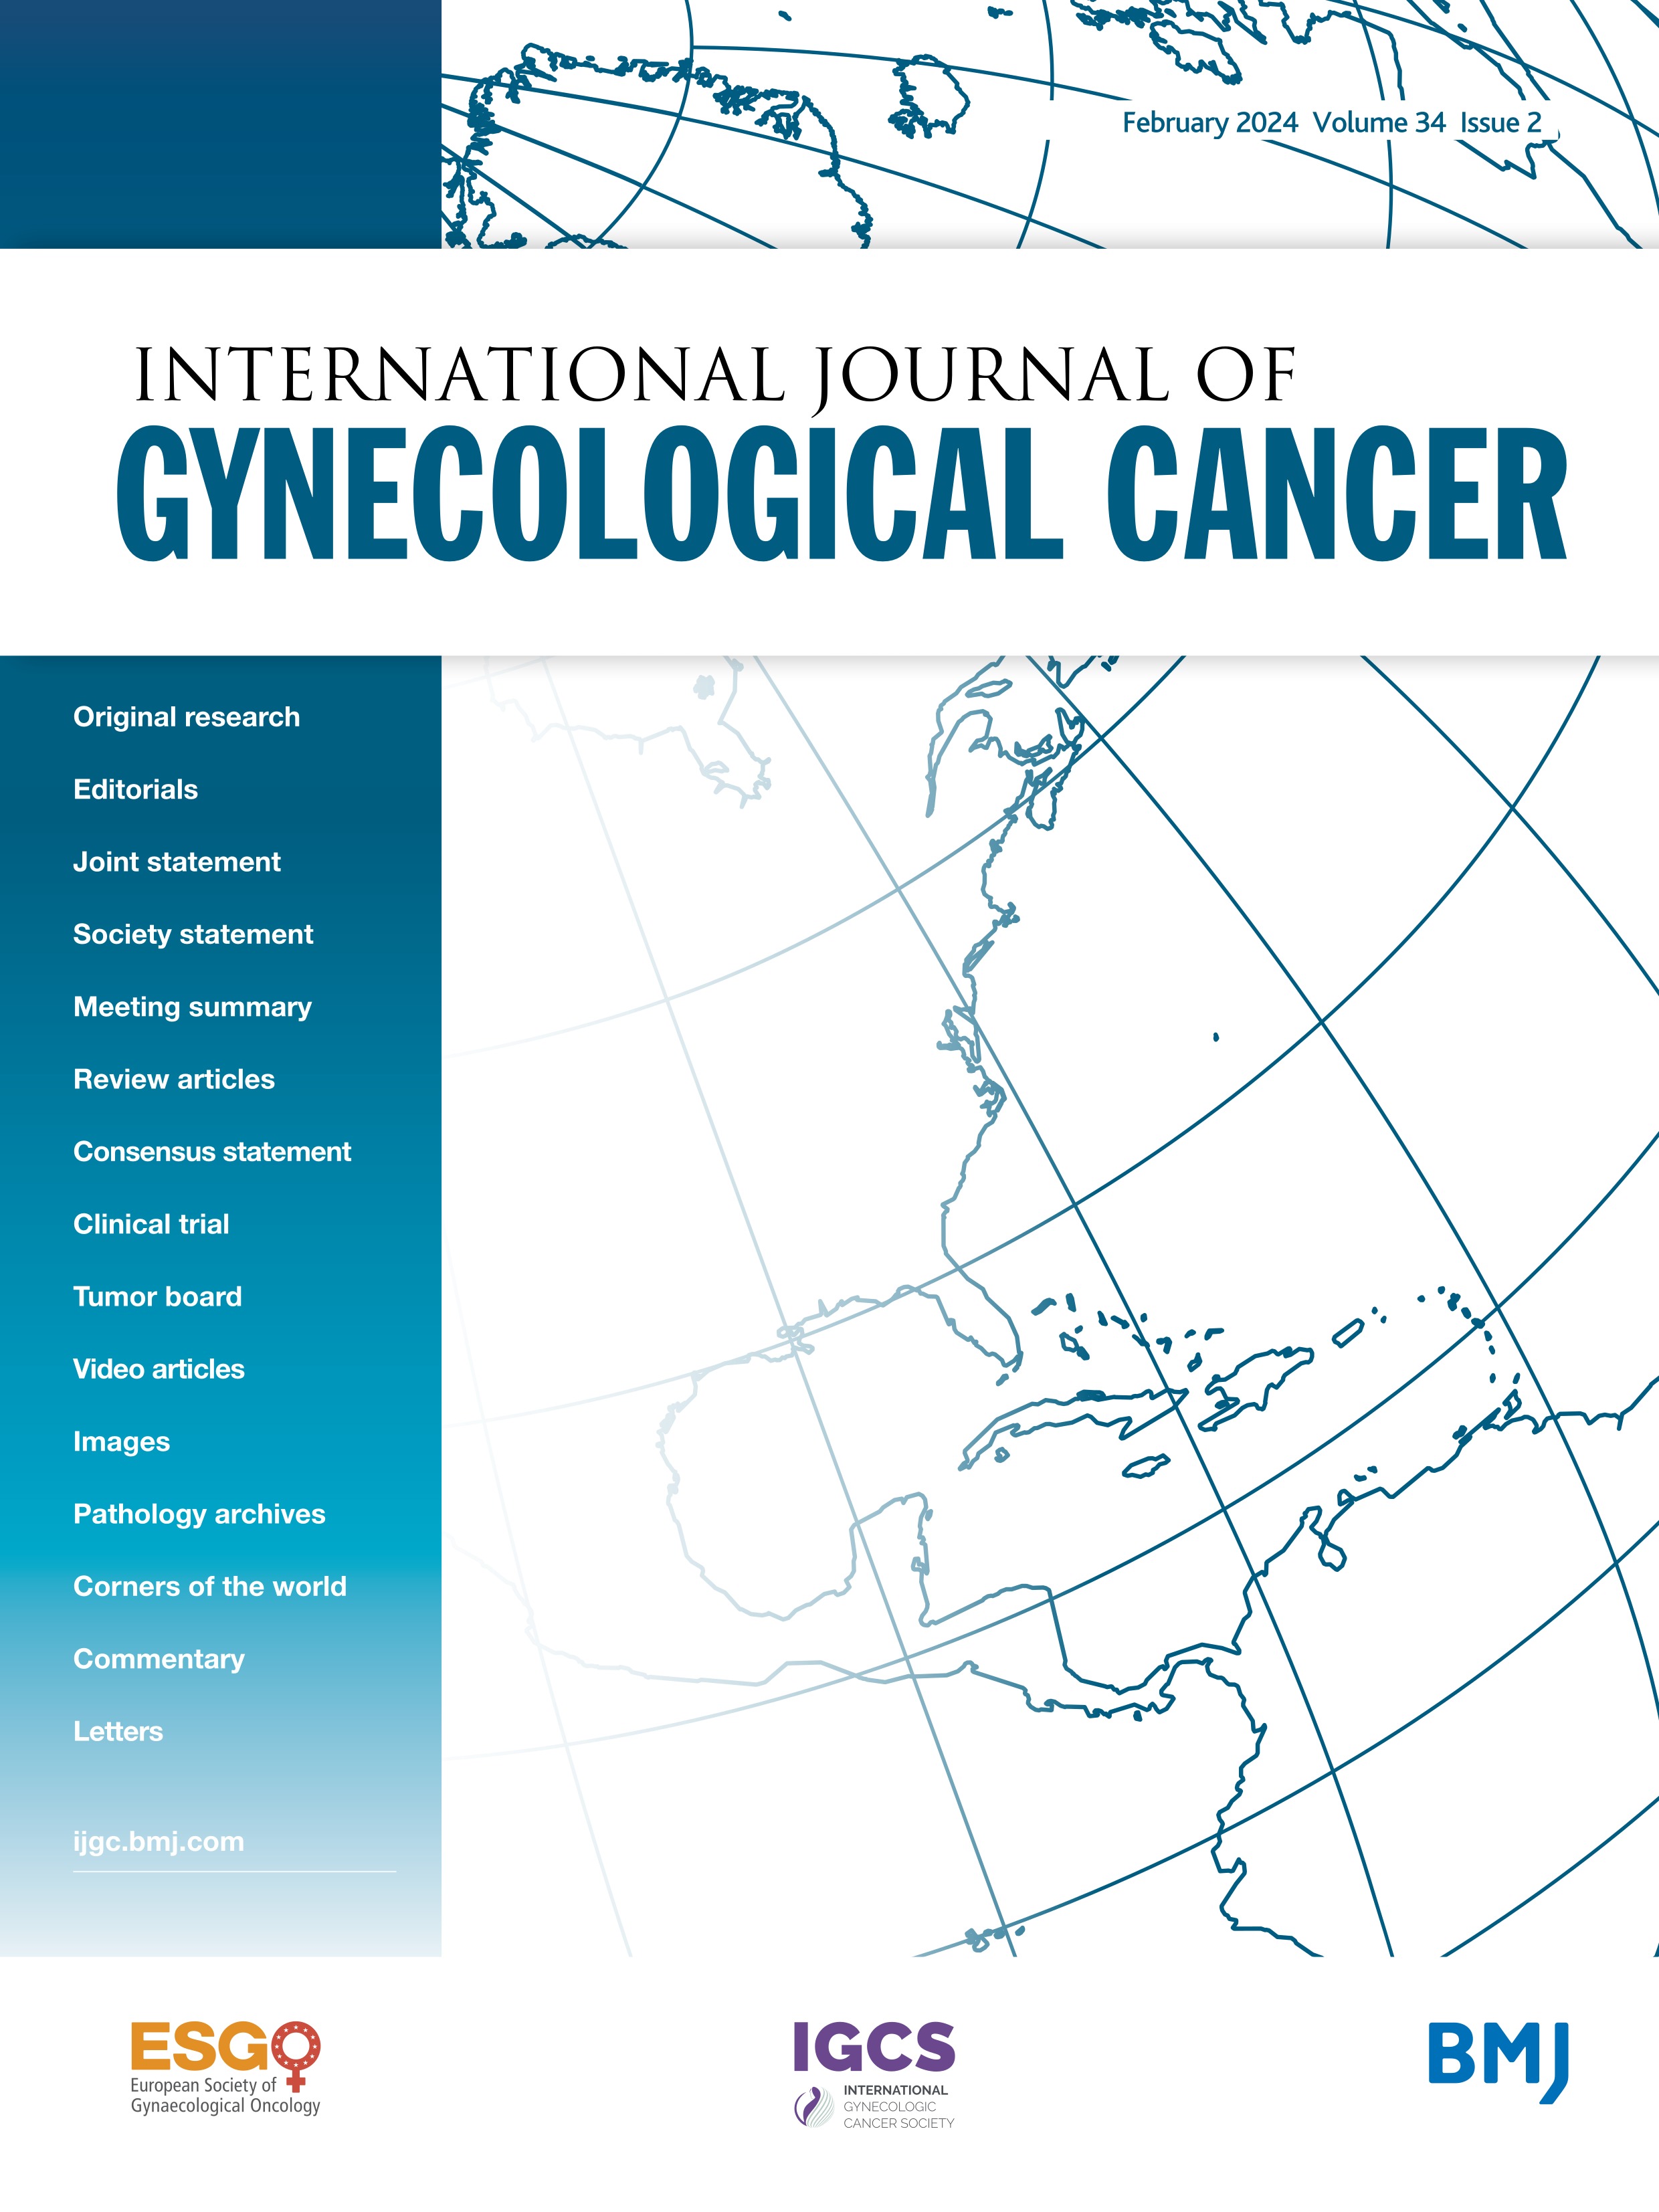 Highlights from the 24th European Congress on Gynaecological Oncology in Istanbul: an ENYGO-IJGC Fellows compilation